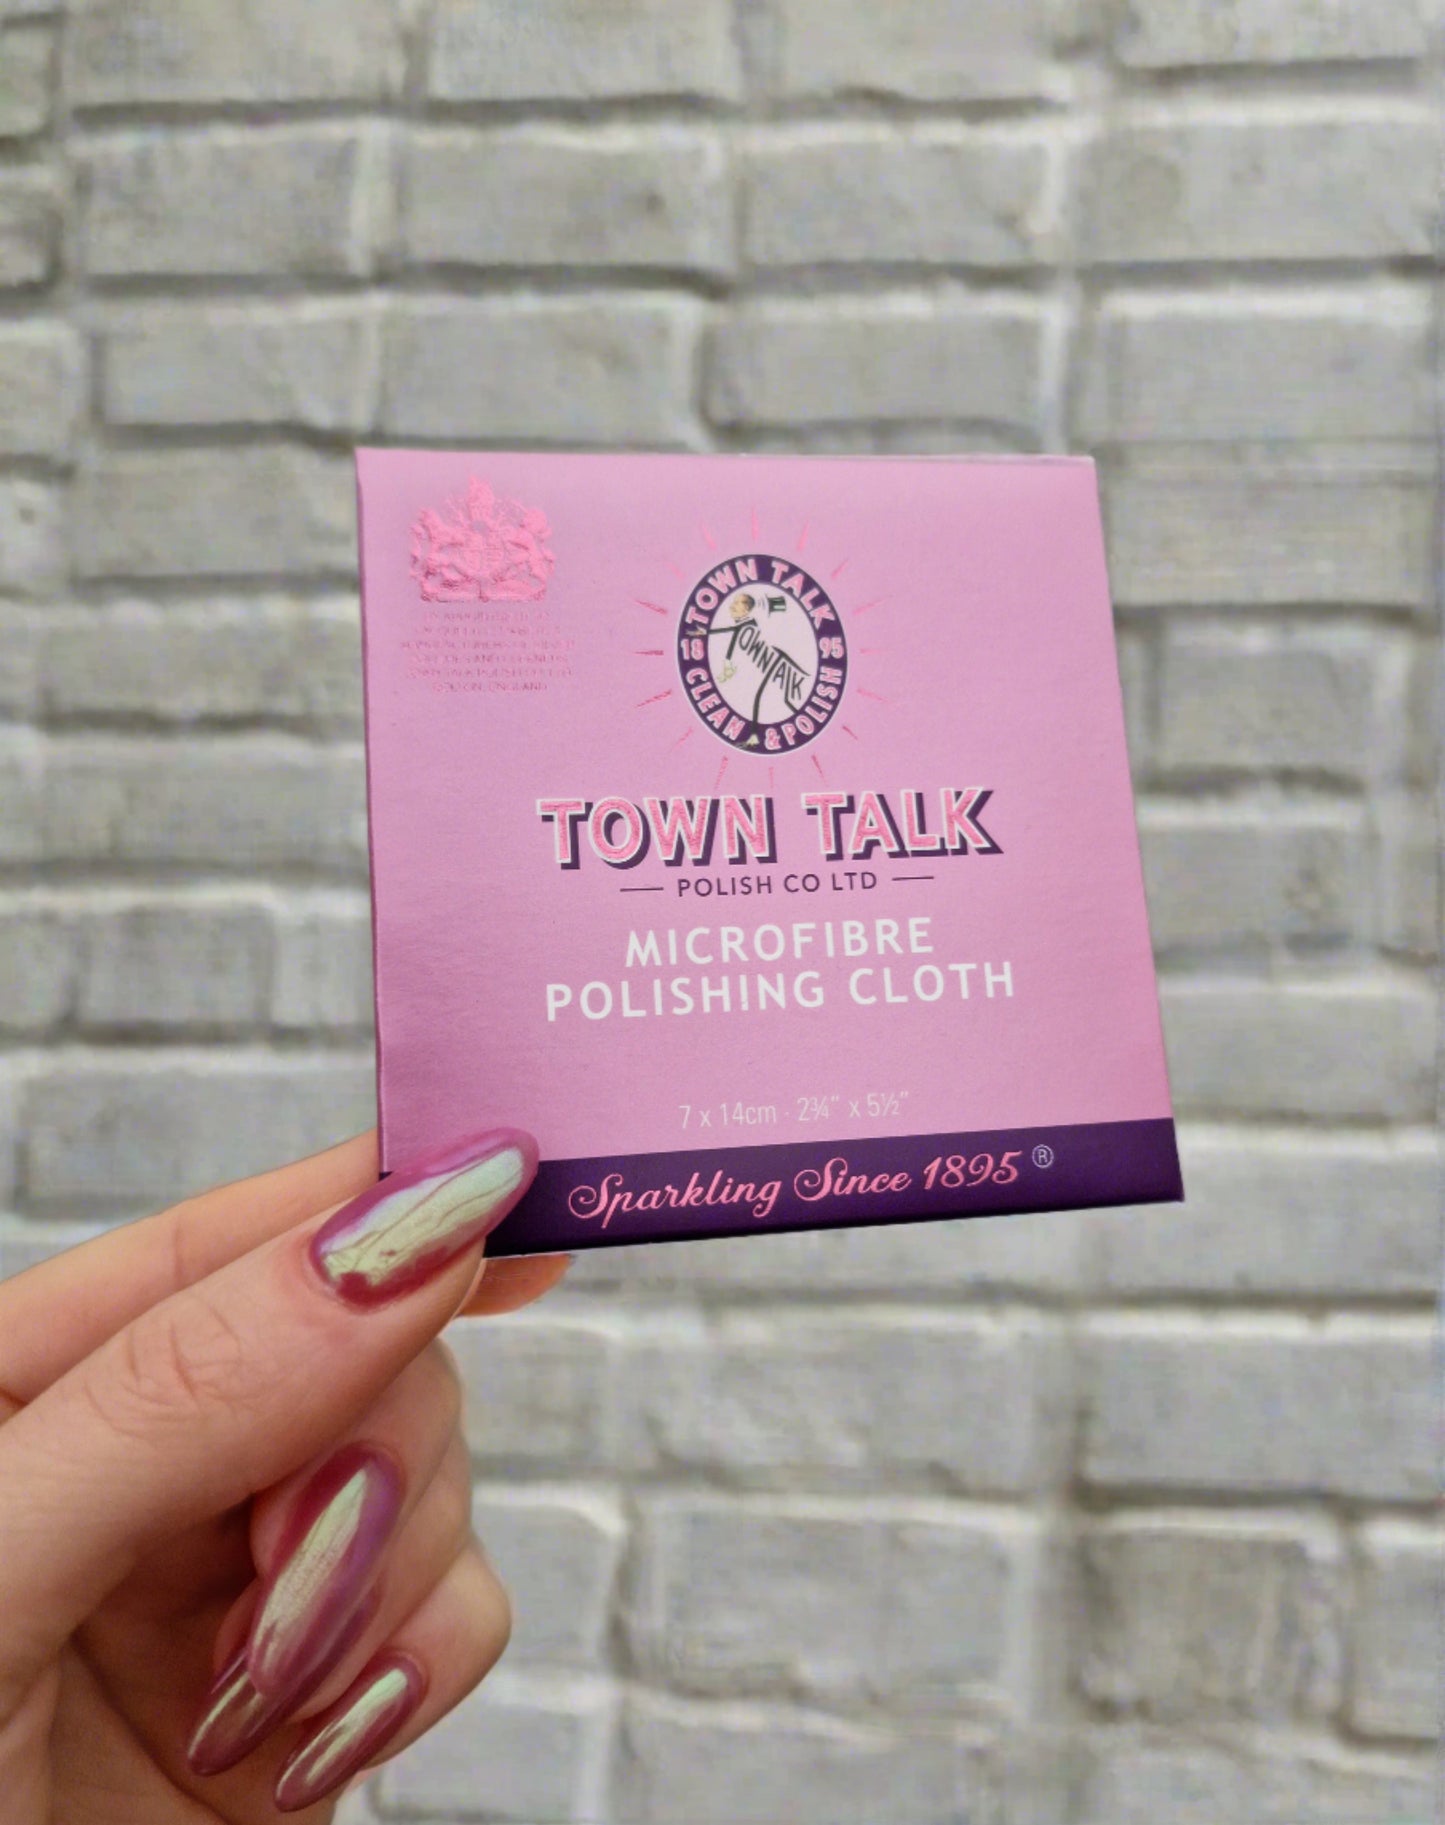  Outer packaging for the microfiber jewellery cloth. A small purple packet with Town Talk logo on the front. Brick wall as a background.